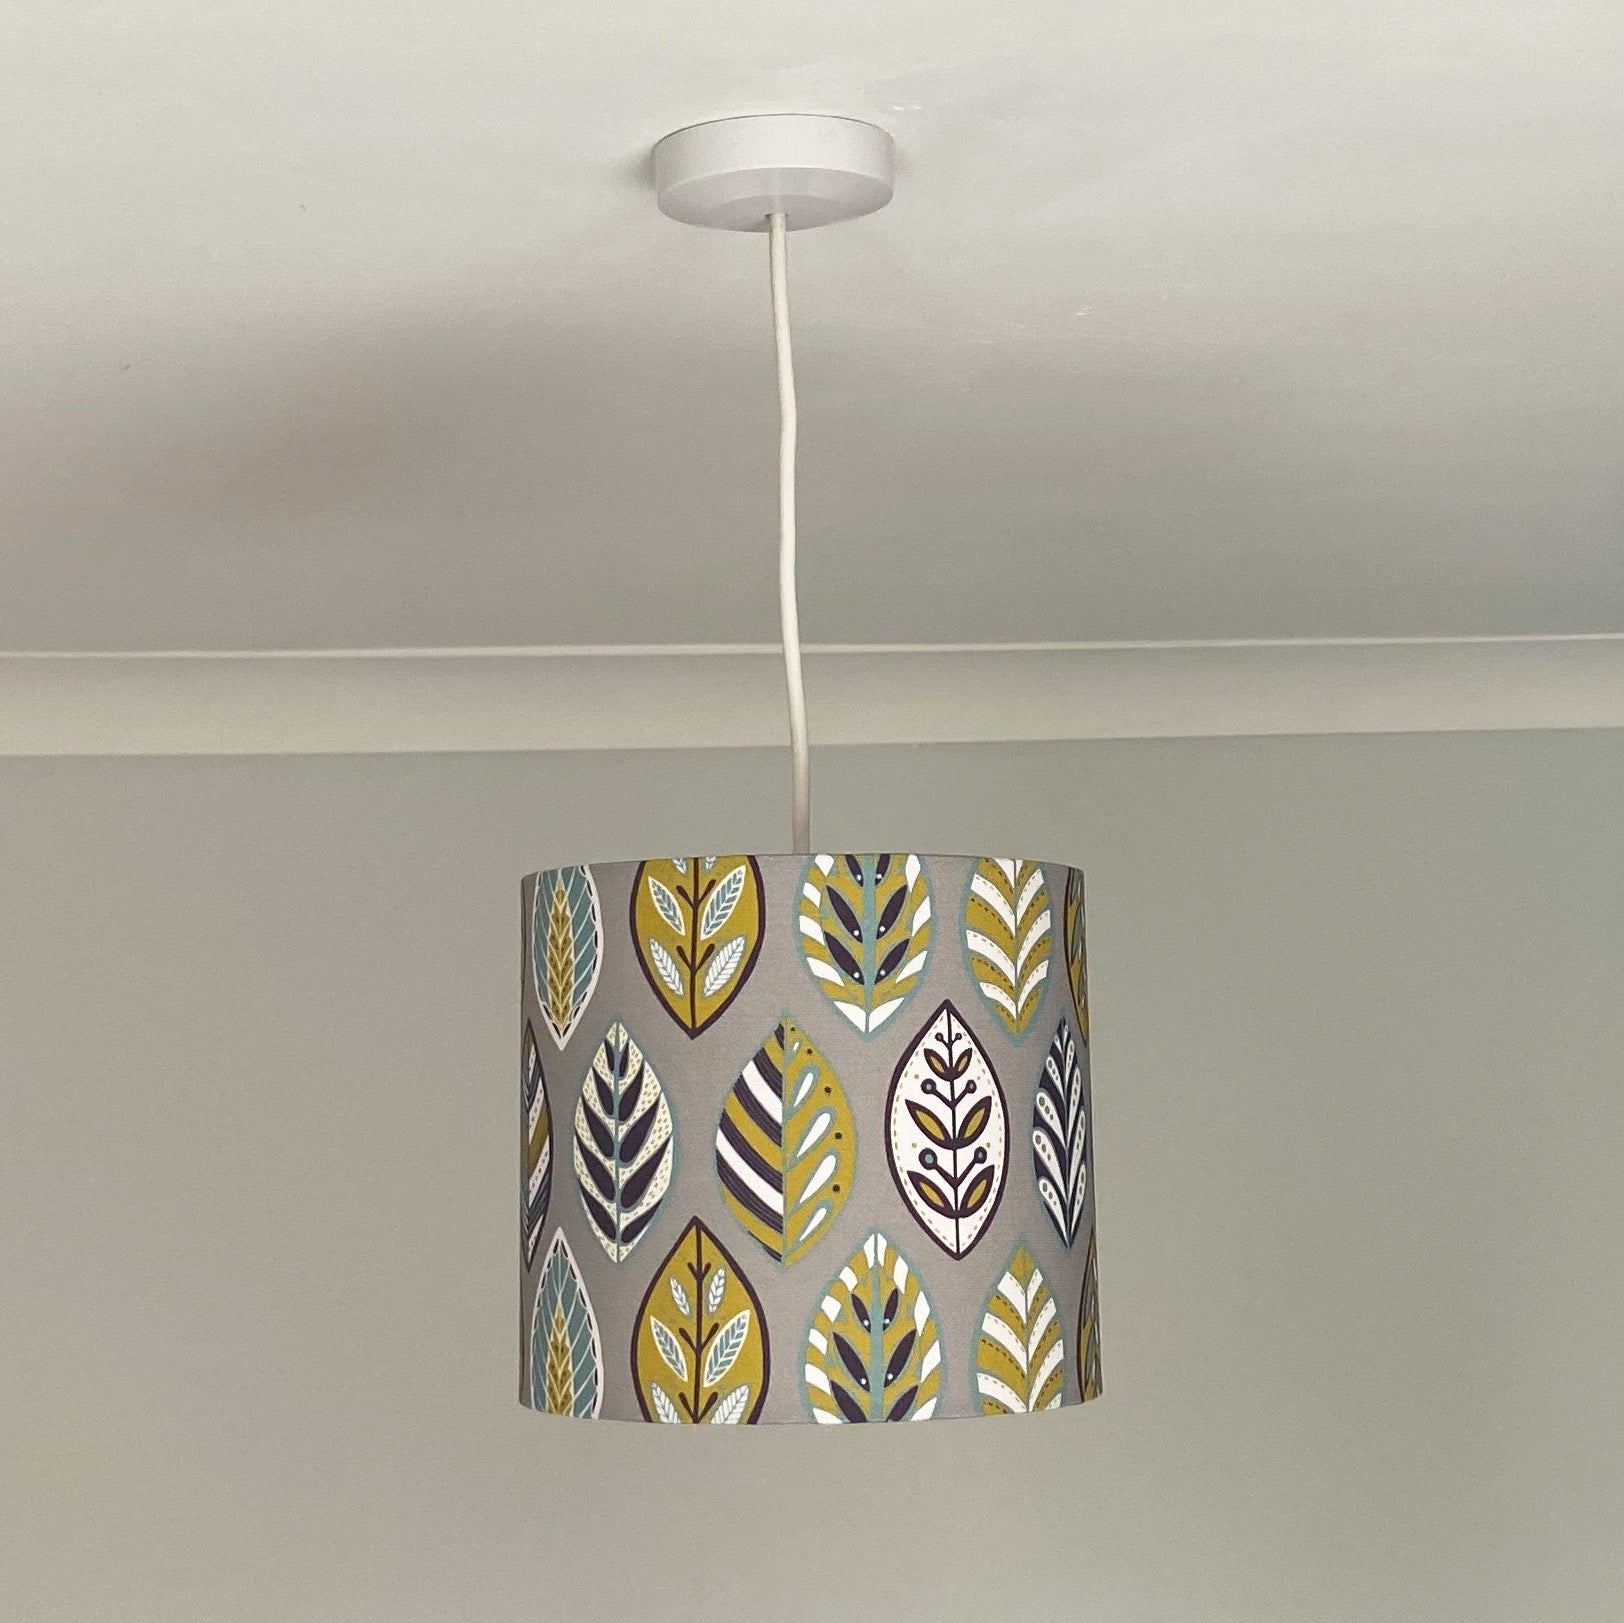 Small Grey Oak leaf Lampshade with a ceiling pendant fitting. This pattern features Blue, Yellow, White and Aubergine leaf Pattern in a Skandinavian style on a Grey background.